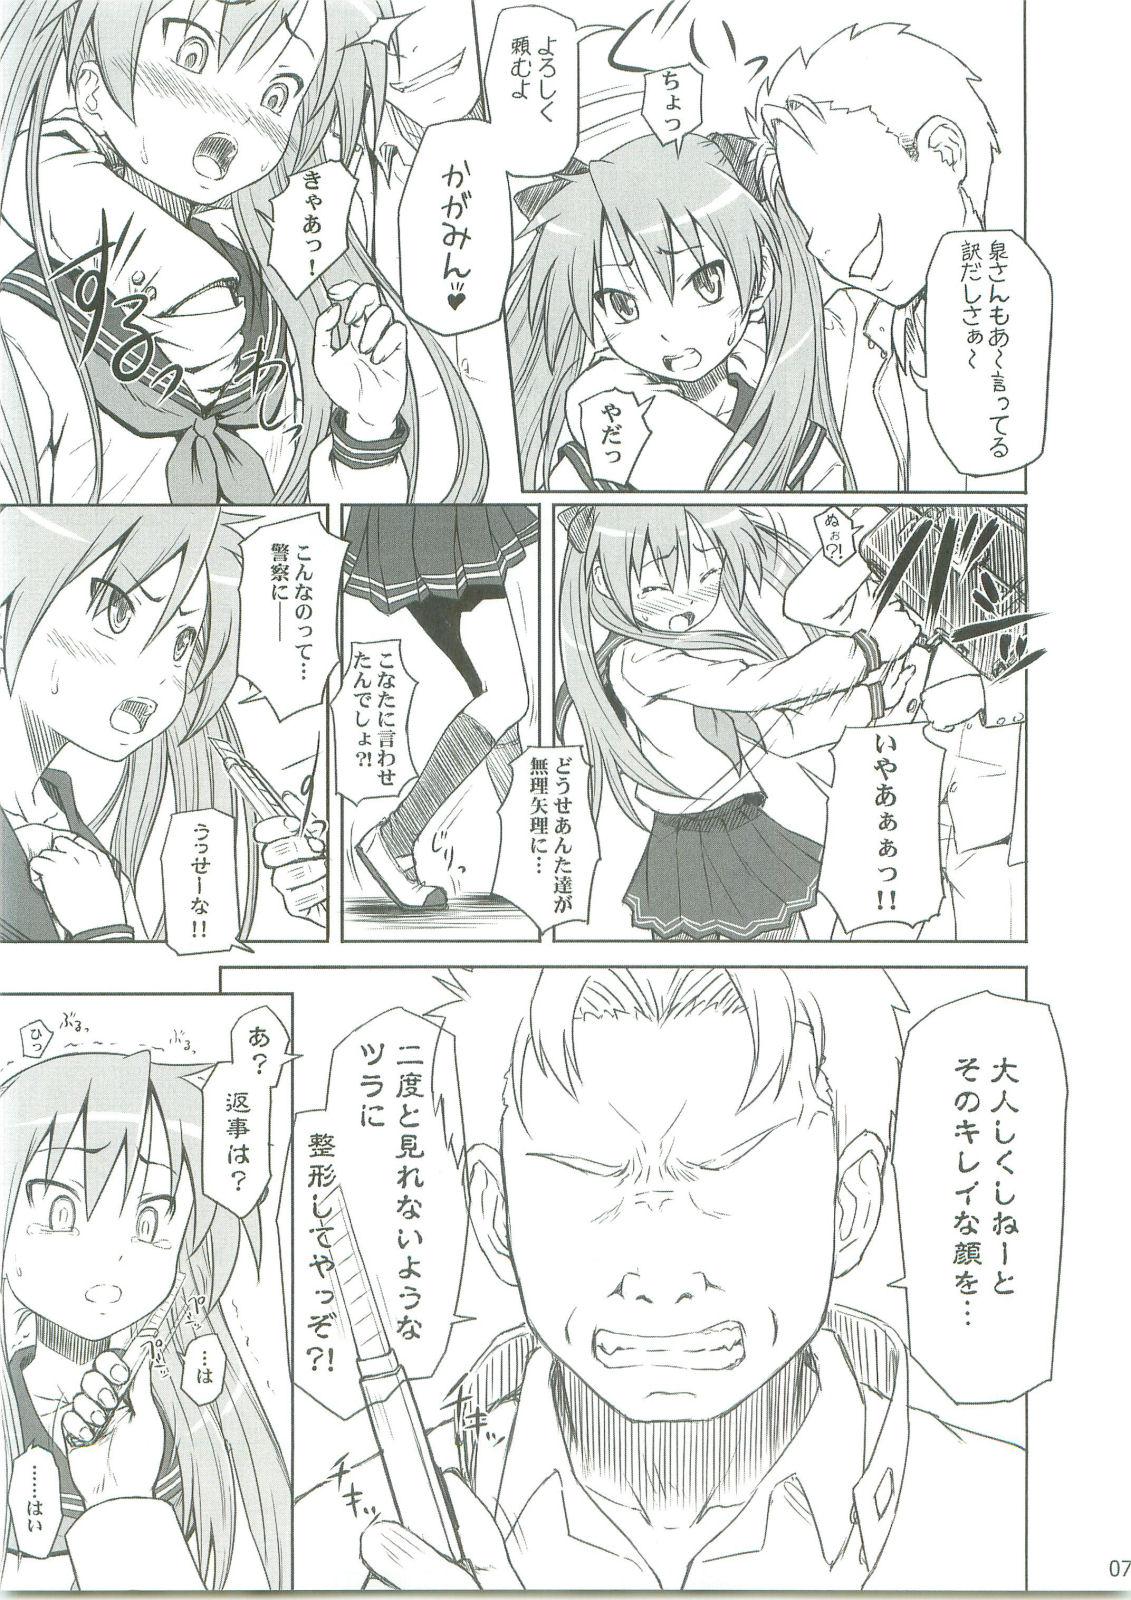 Stunning Kagamin wa Ore no Yome - Lucky star Pounded - Page 6